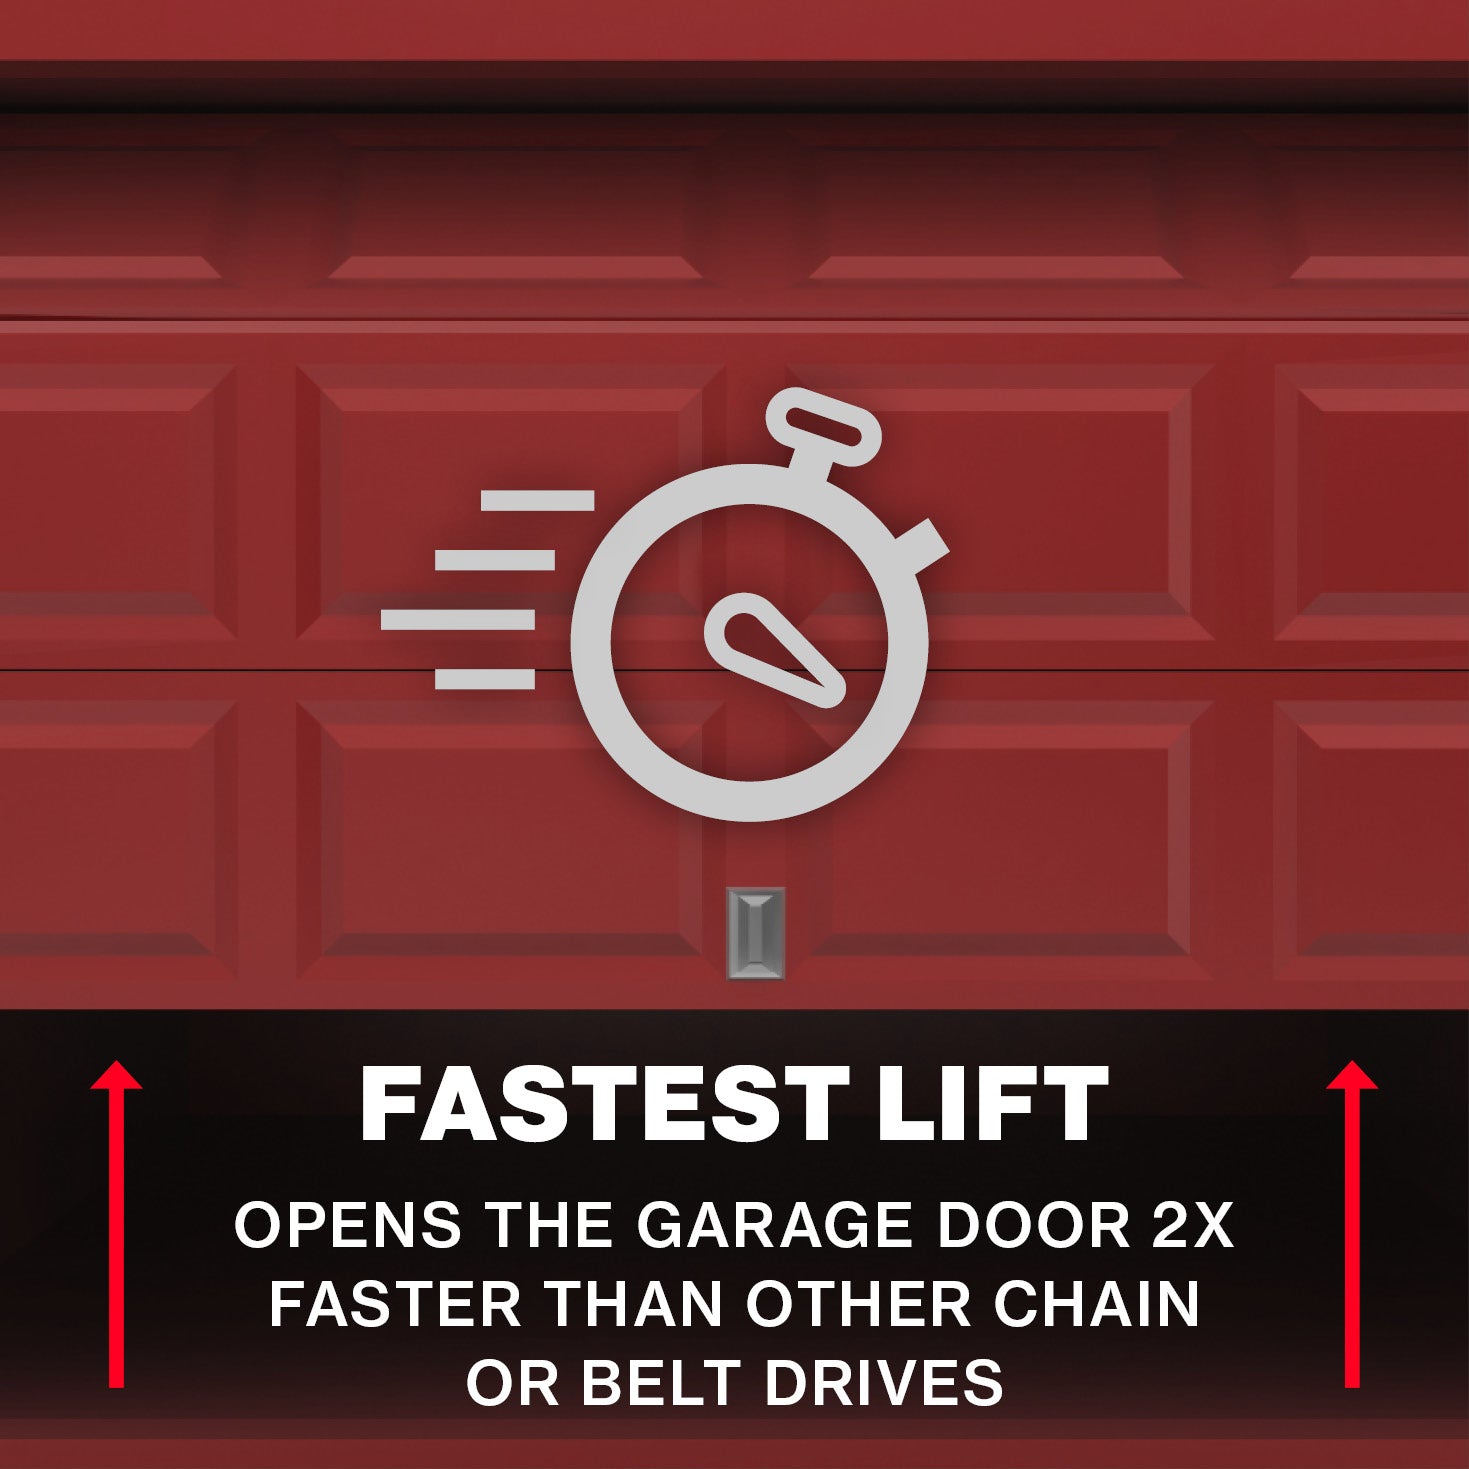 Genie screwdrive garage door openers have the fastest lift - up to 2X's faster!